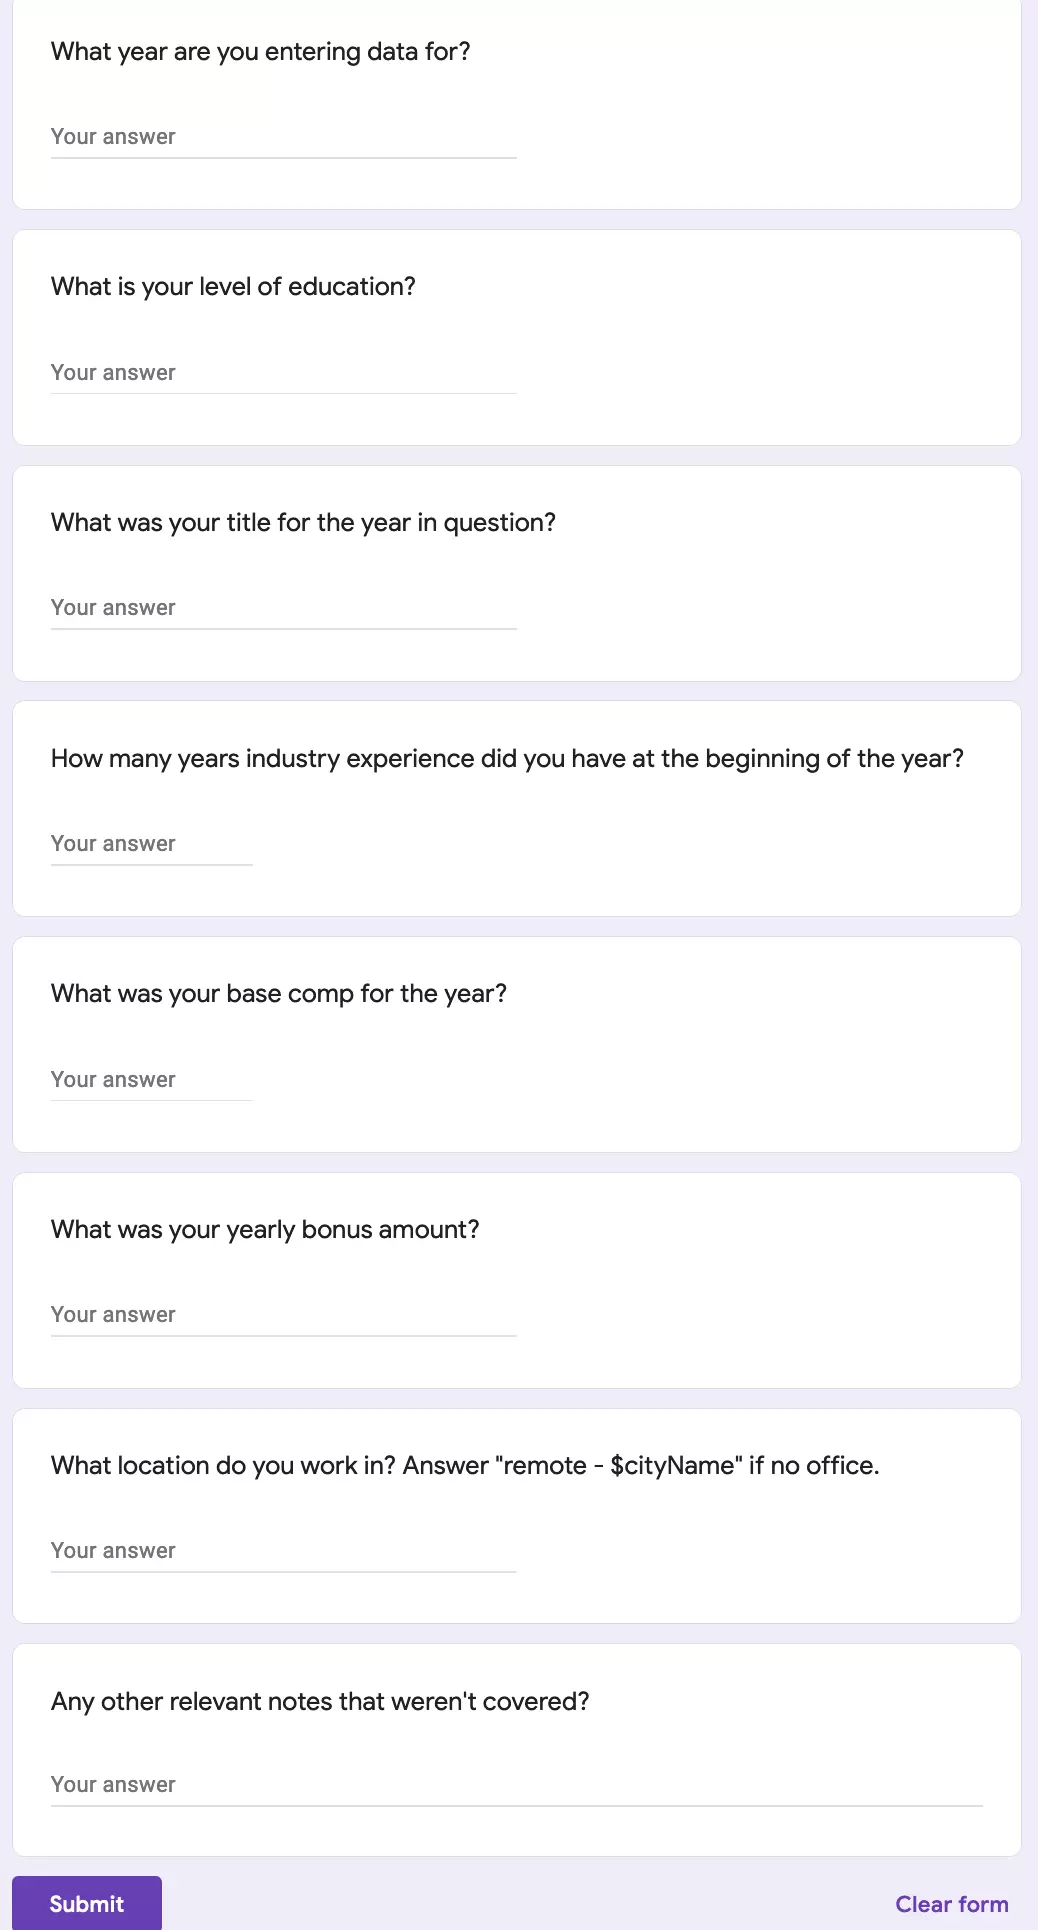 Questions:  What year are you entering data for?  What is your level of education? What was your title for the year in question? How many years industry experience did you have at the beginning of the year? What was your base comp for the year? What was your yearly bonus amount?  What location do you work in? Answer "remote - name of city" if no office. Any other relevant notes that weren't covered?